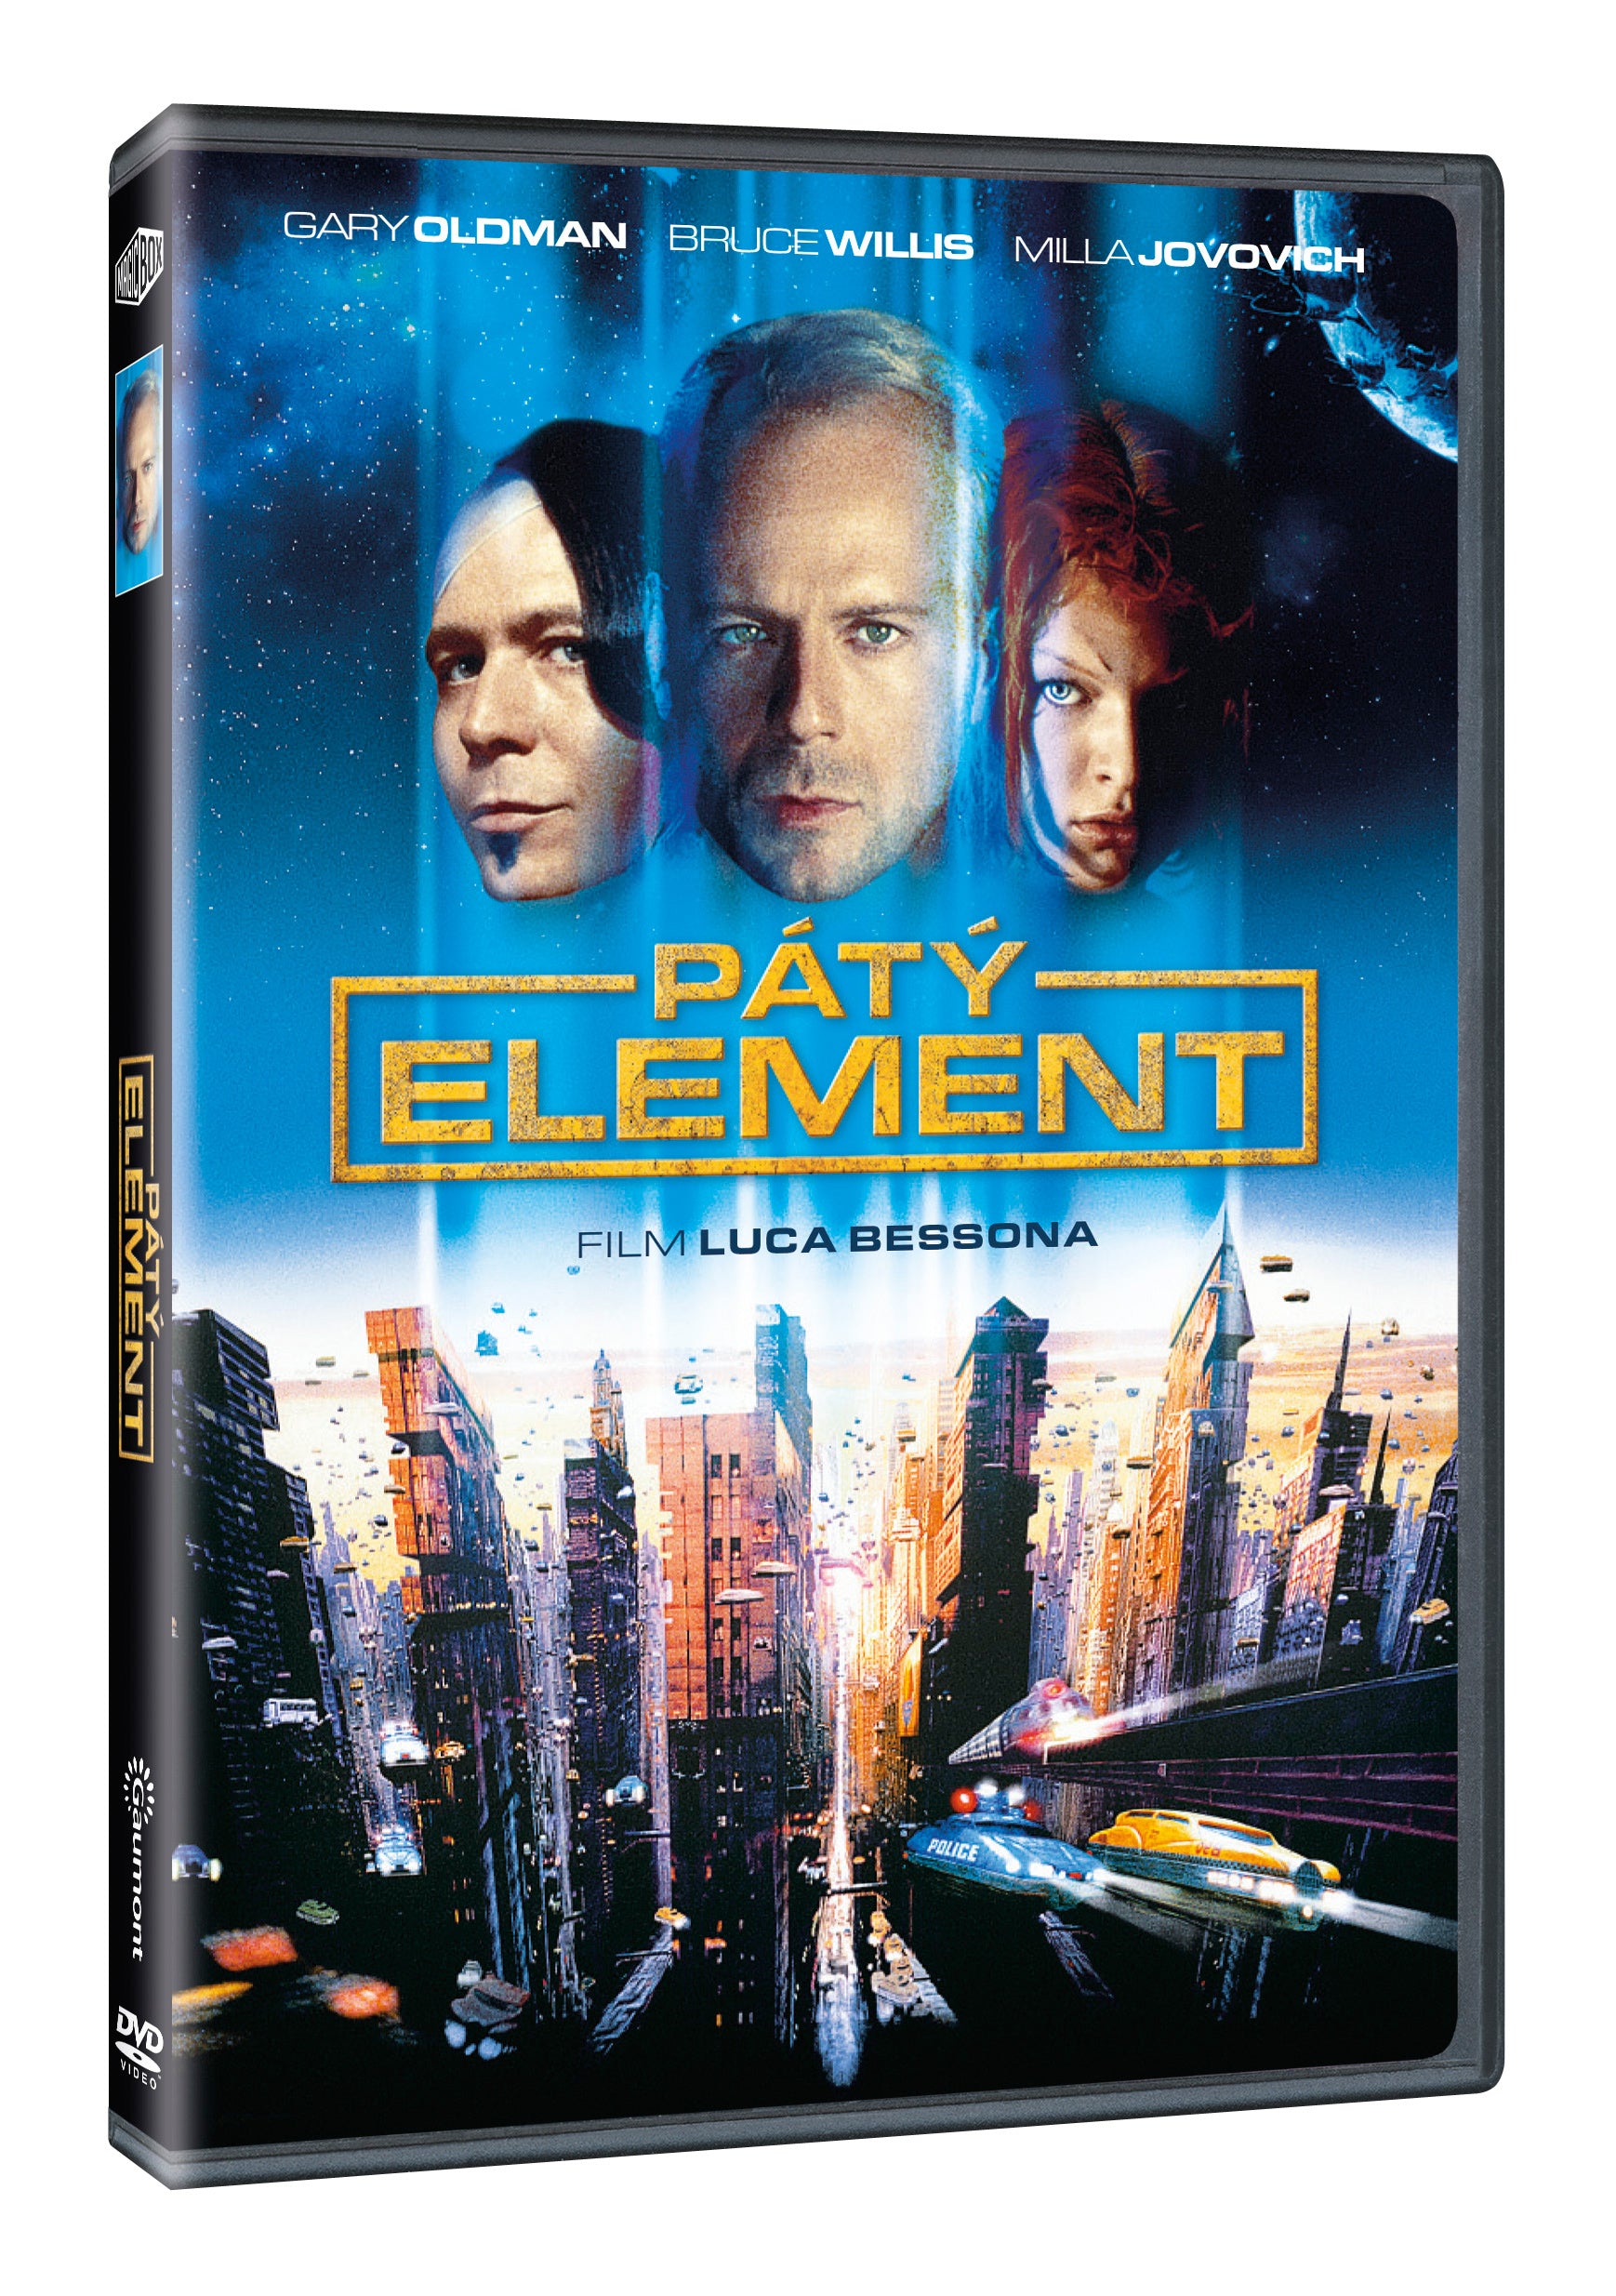 Paty element DVD / The Fifth Element